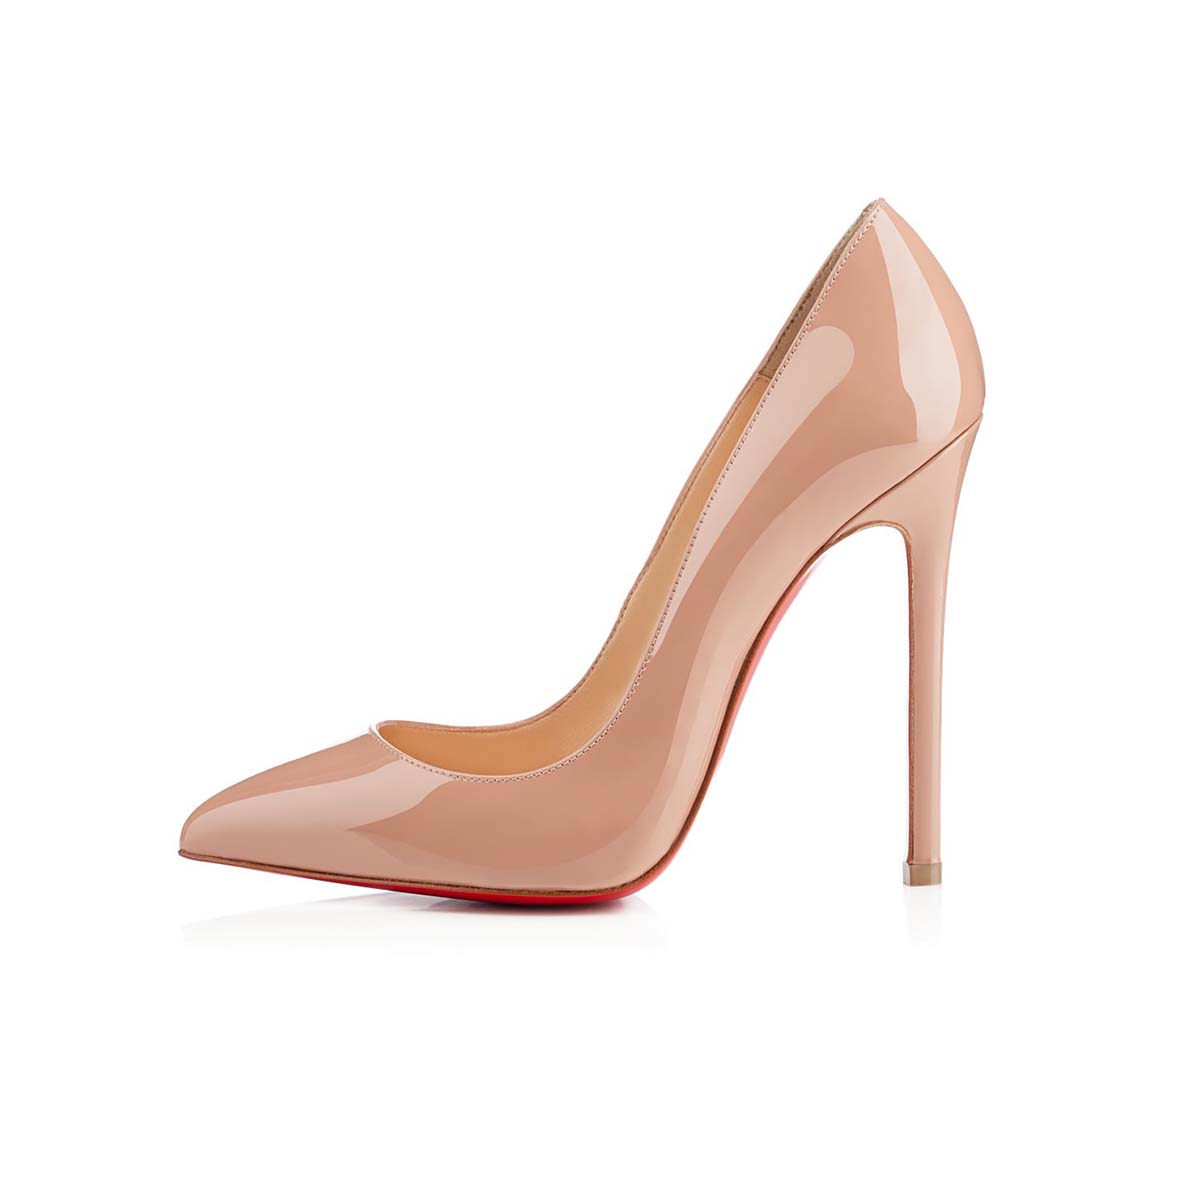 Christian Louboutin Women Pigalle Nude Patent Leather 120mm Shoes Sandy